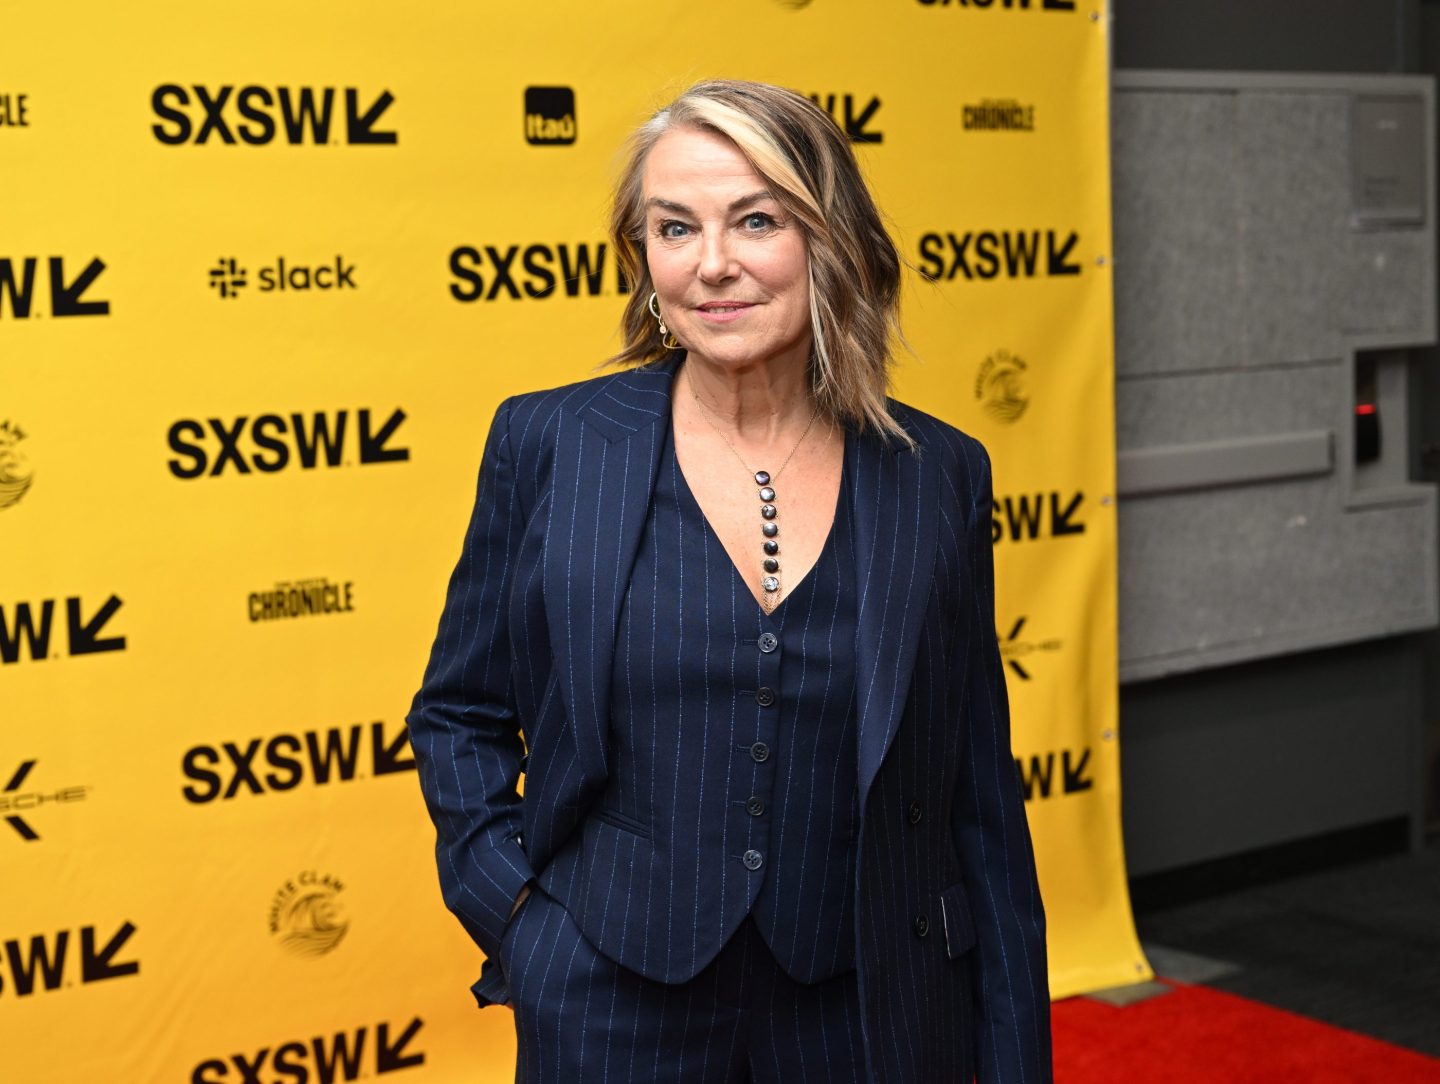 AUSTIN, TEXAS &#8211; MARCH 11: Esther Perel attends the Featured Session: &#8220;The Other A.I.: The Rise of Artificial Intimacy &amp; What it Means for &#8216;Us'&#8221; during the 2023 SXSW Conference and Festivals at Austin Convention Center on March 11, 2023 in Austin, Texas. (Photo by Chris Saucedo/Getty Images for SXSW)